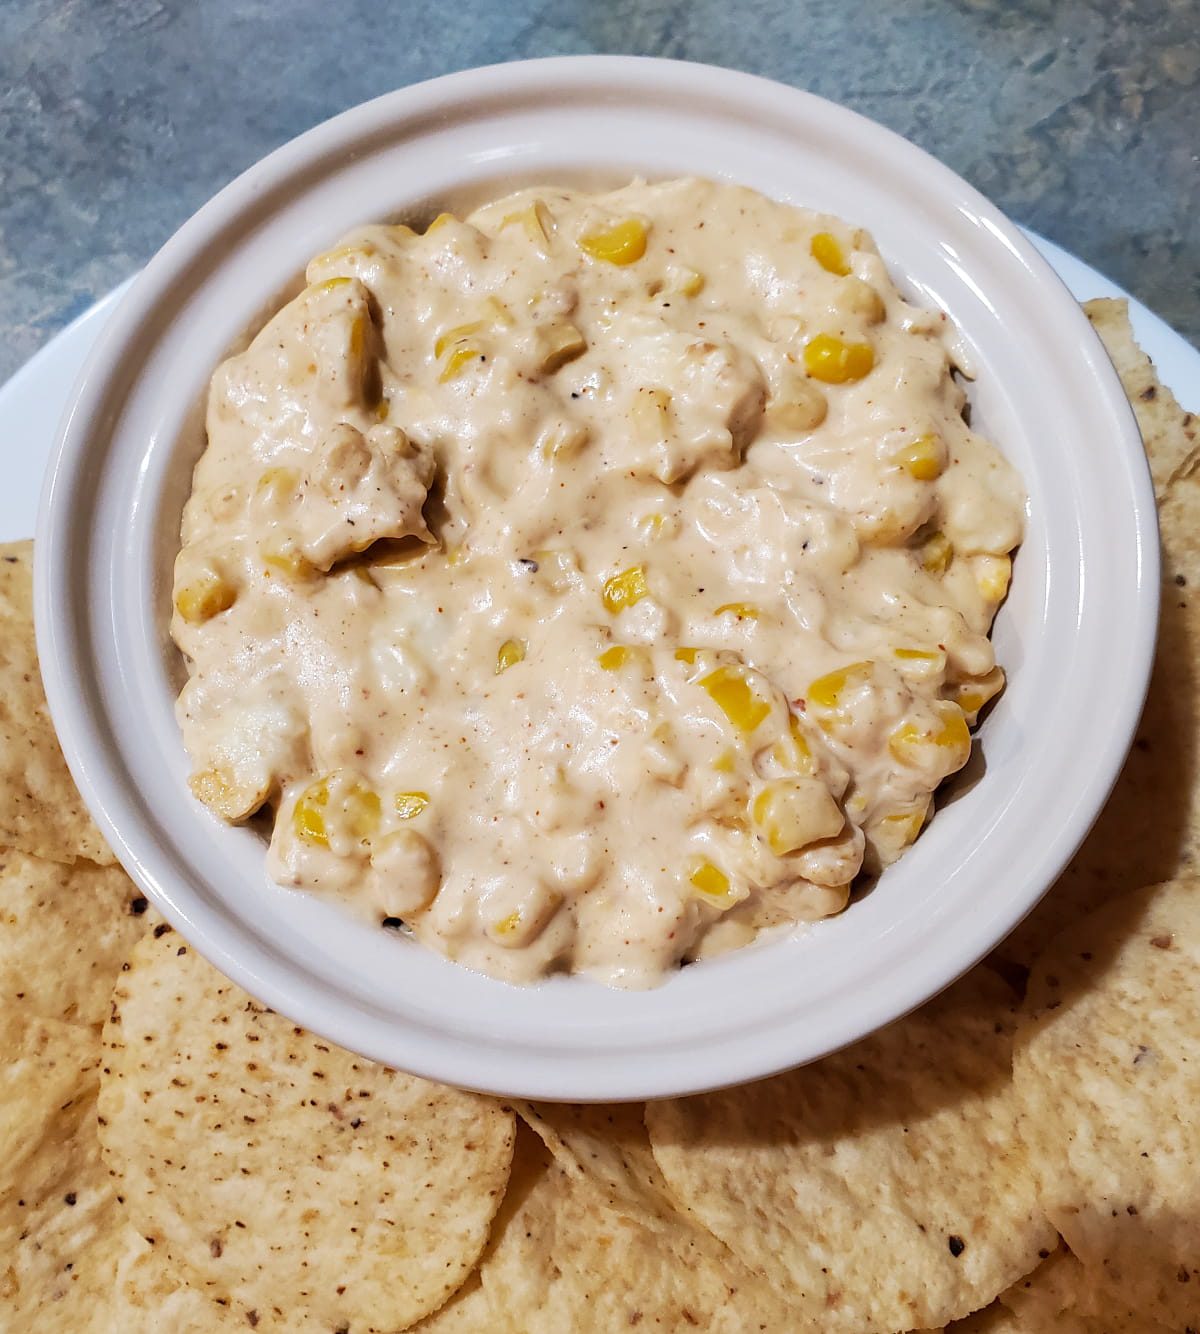 Street corn dip with corn, sour cream, mayonnaise, and spices. Served in a small bowl with tortilla chips.